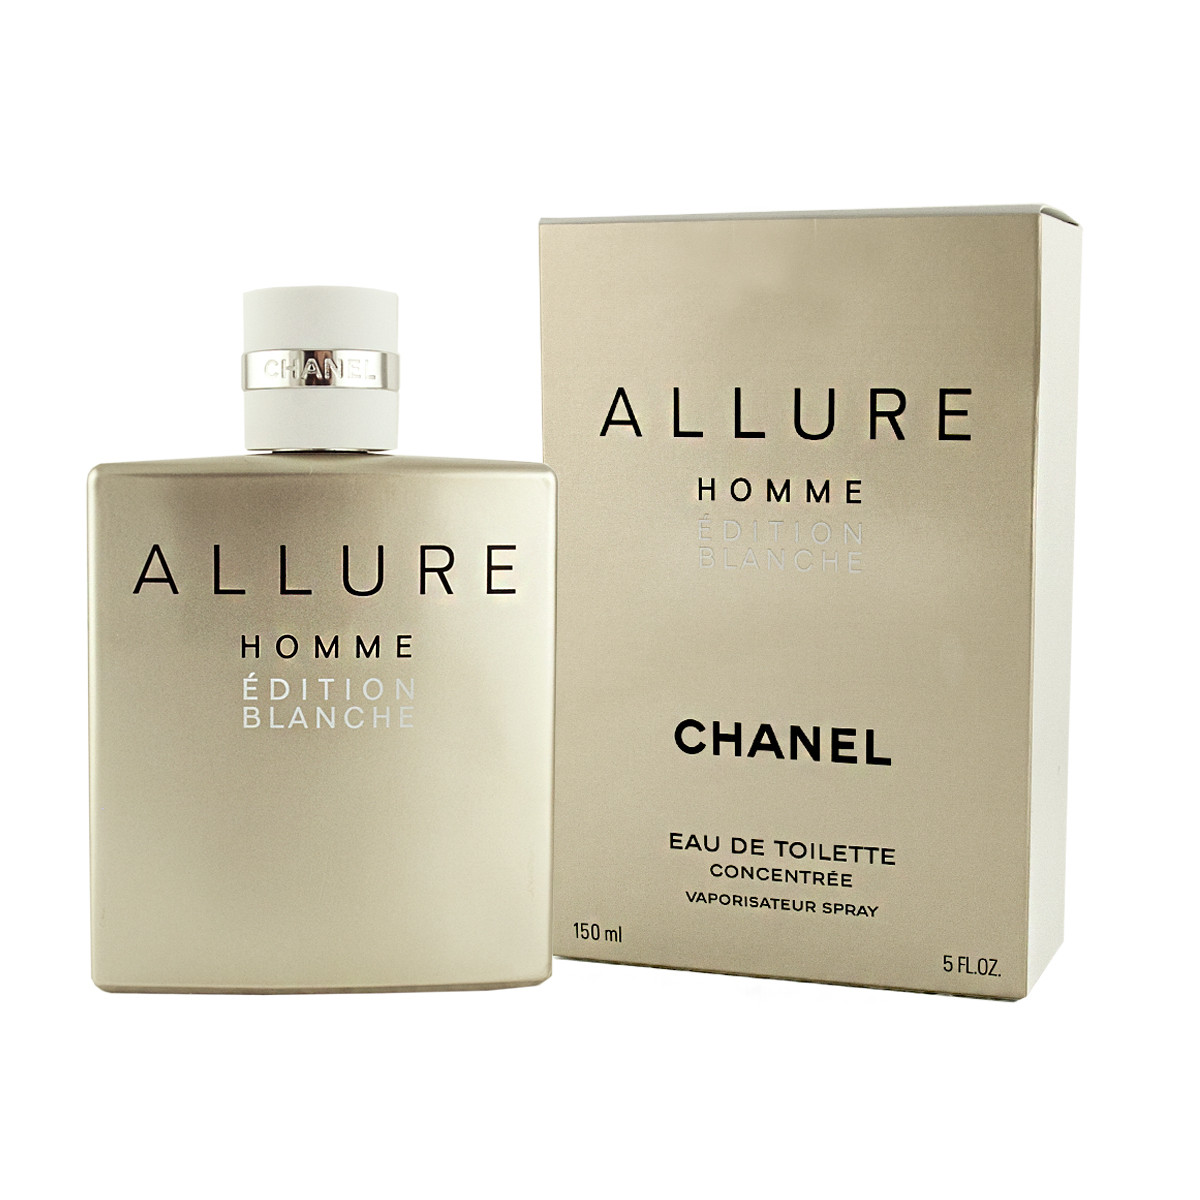 Туалетная вода chanel allure homme. Chanel Allure homme Edition Blanche. Парфюм Allure homme Edition Blanche Chanel. Chanel мужские. Allure homme Edition Blanche. Chanel Allure Blanche.